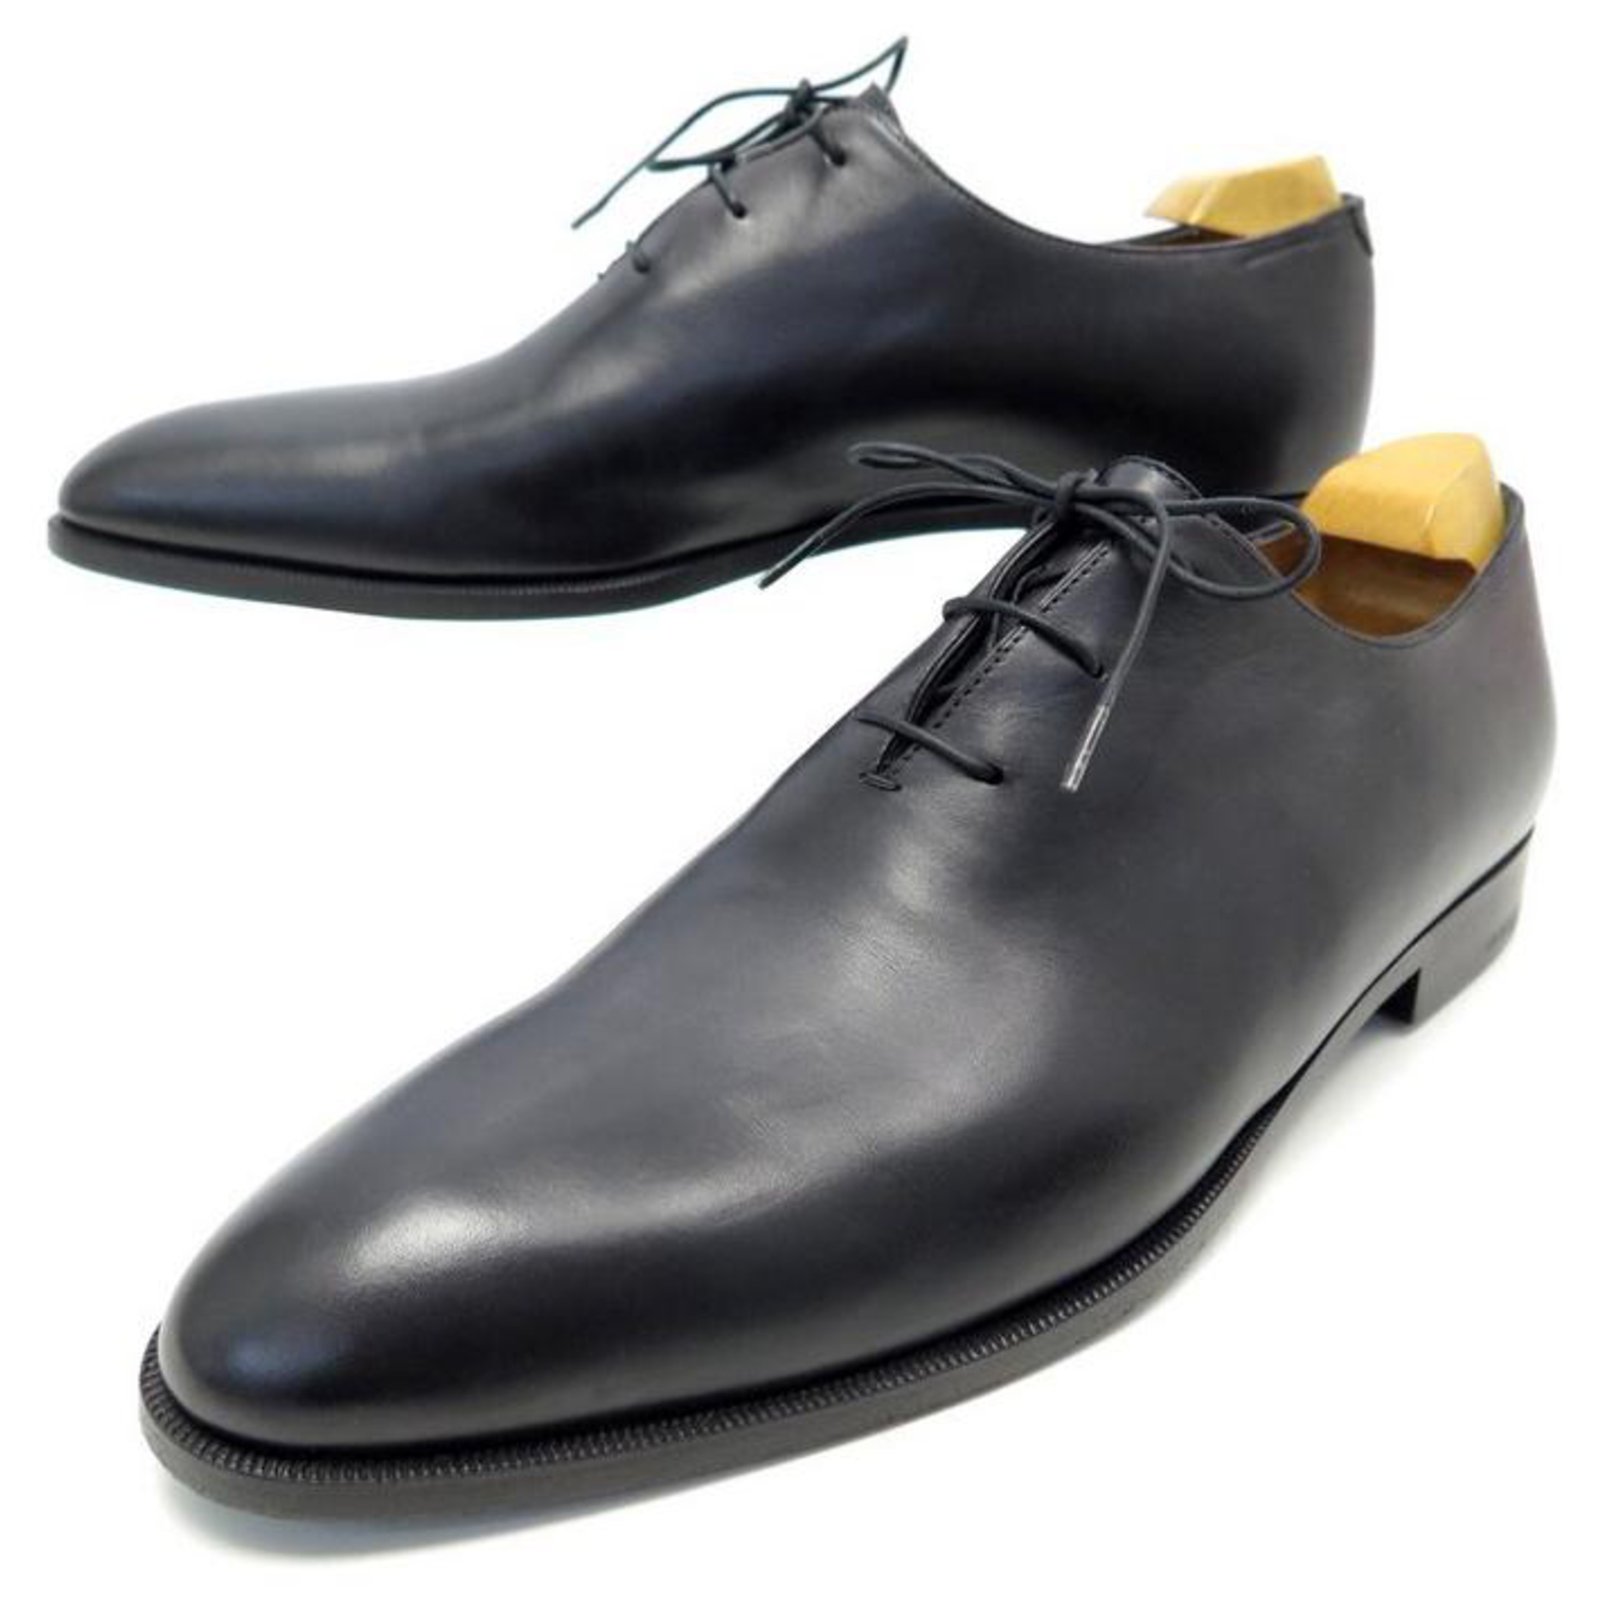 NEW BERLUTI RICHELIEU ALESSANDRO SHOES 9 43 ANTHRACITE LEATHER